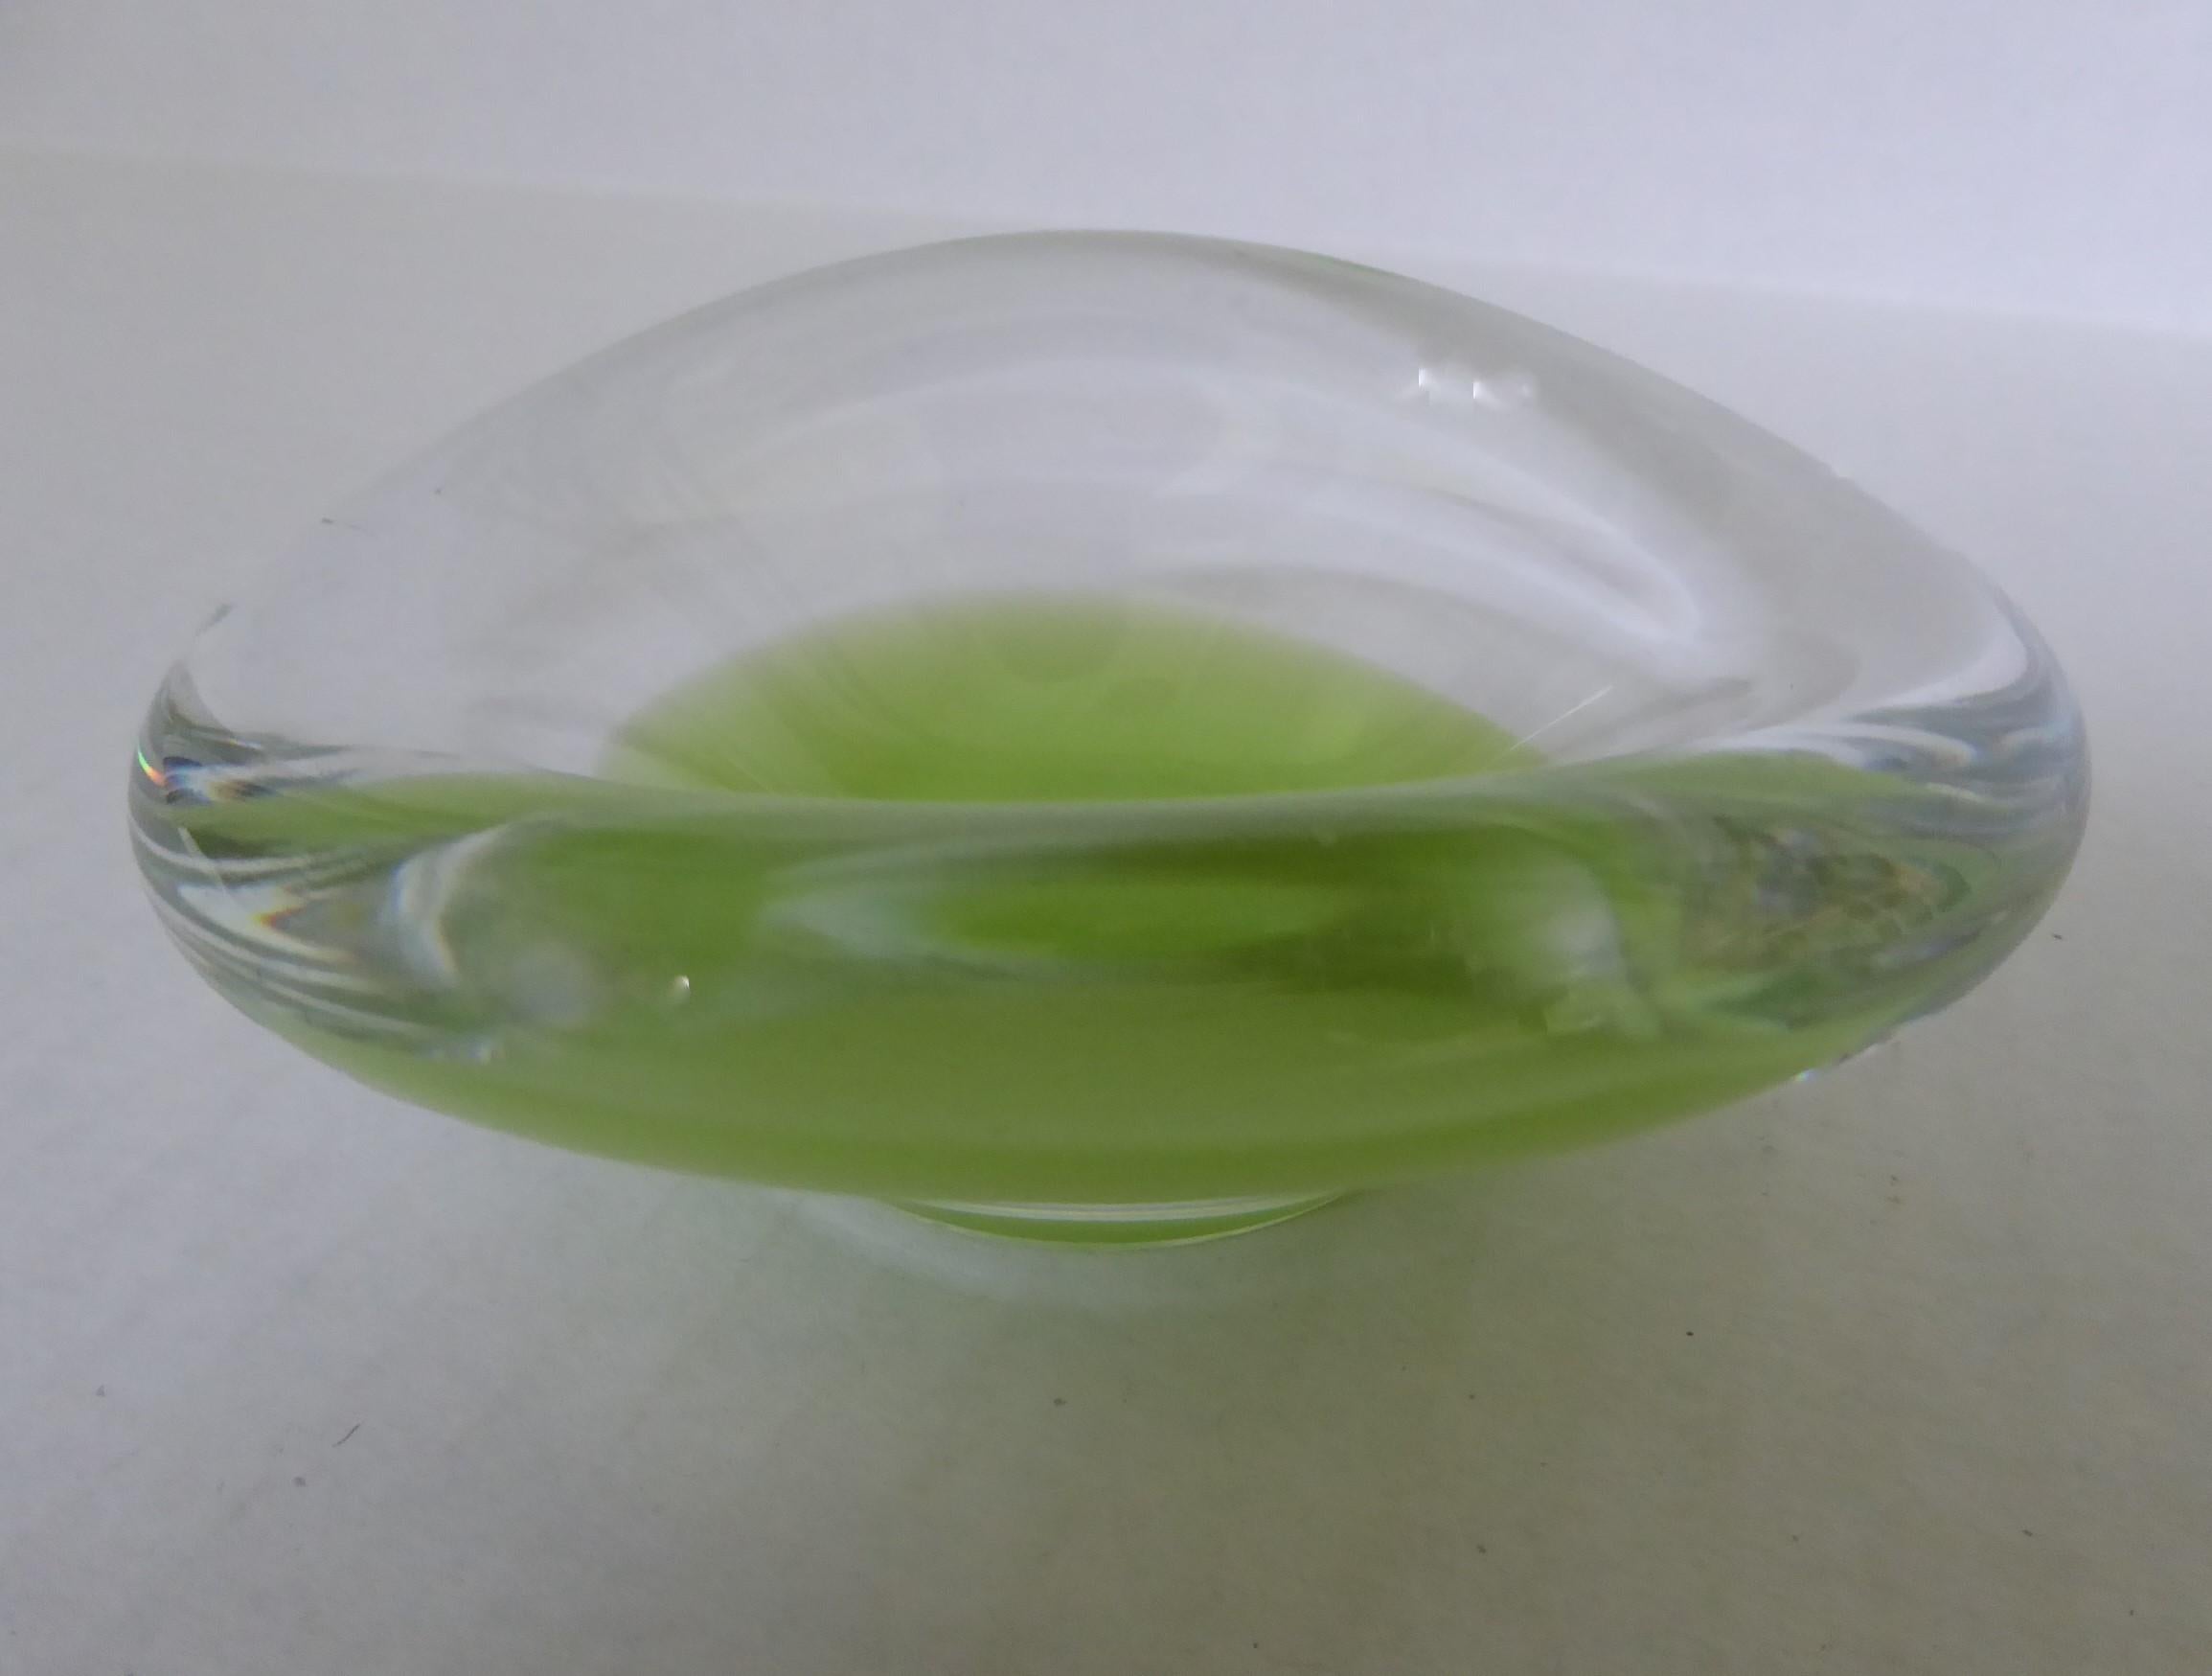 From Swedish Master Vicke Lindstrand and Kosta, a 1960s Amoeba shaped Sommerso bowl.
Bowl or dish in Sommerso technique, clear glass and lemony green, designed by Vicke Lindstrand and Hanne Dreutler for Kosta glass works, Sweden. Vicke Lindstrand